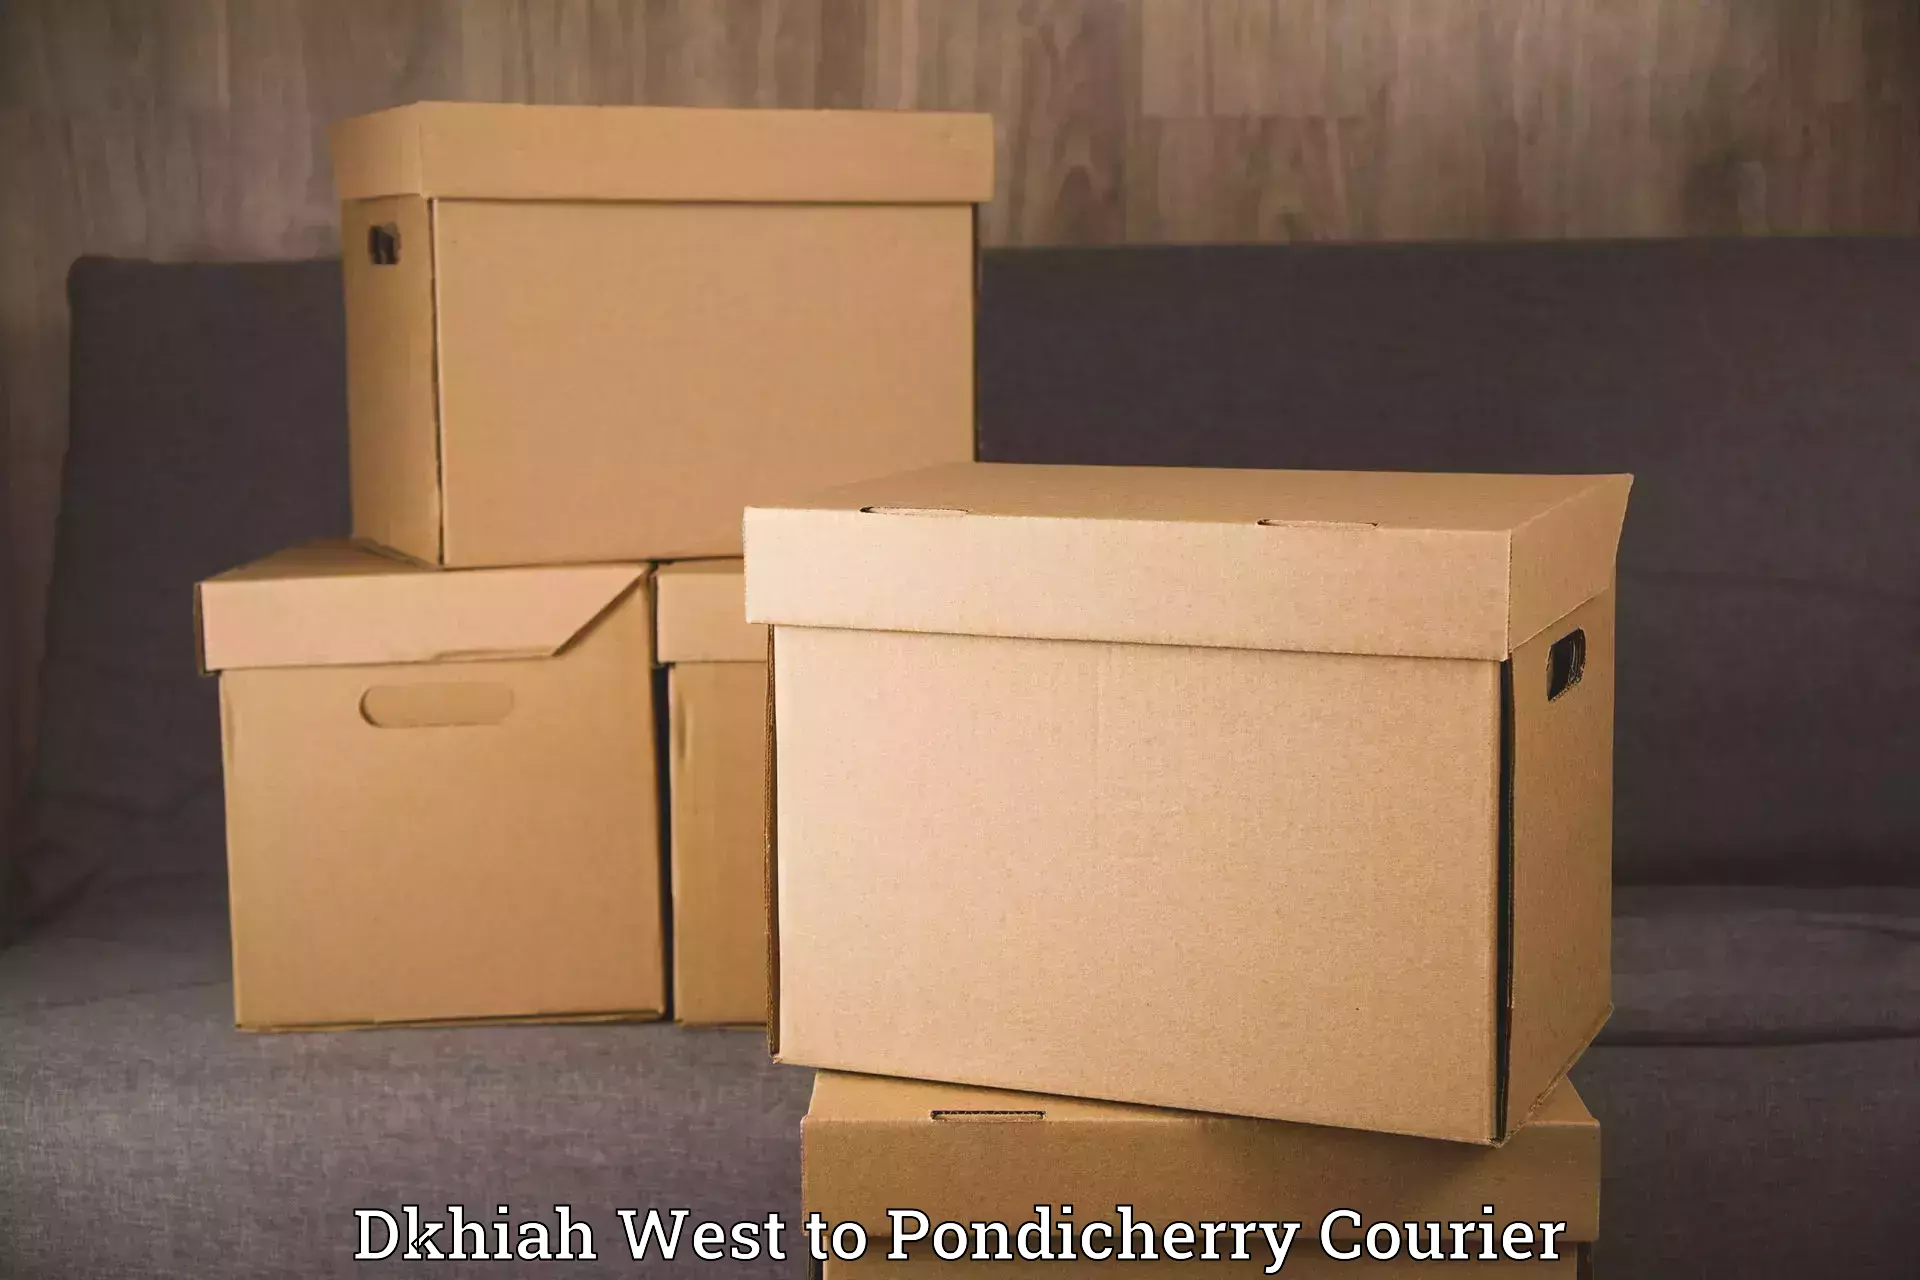 Furniture moving service Dkhiah West to Pondicherry